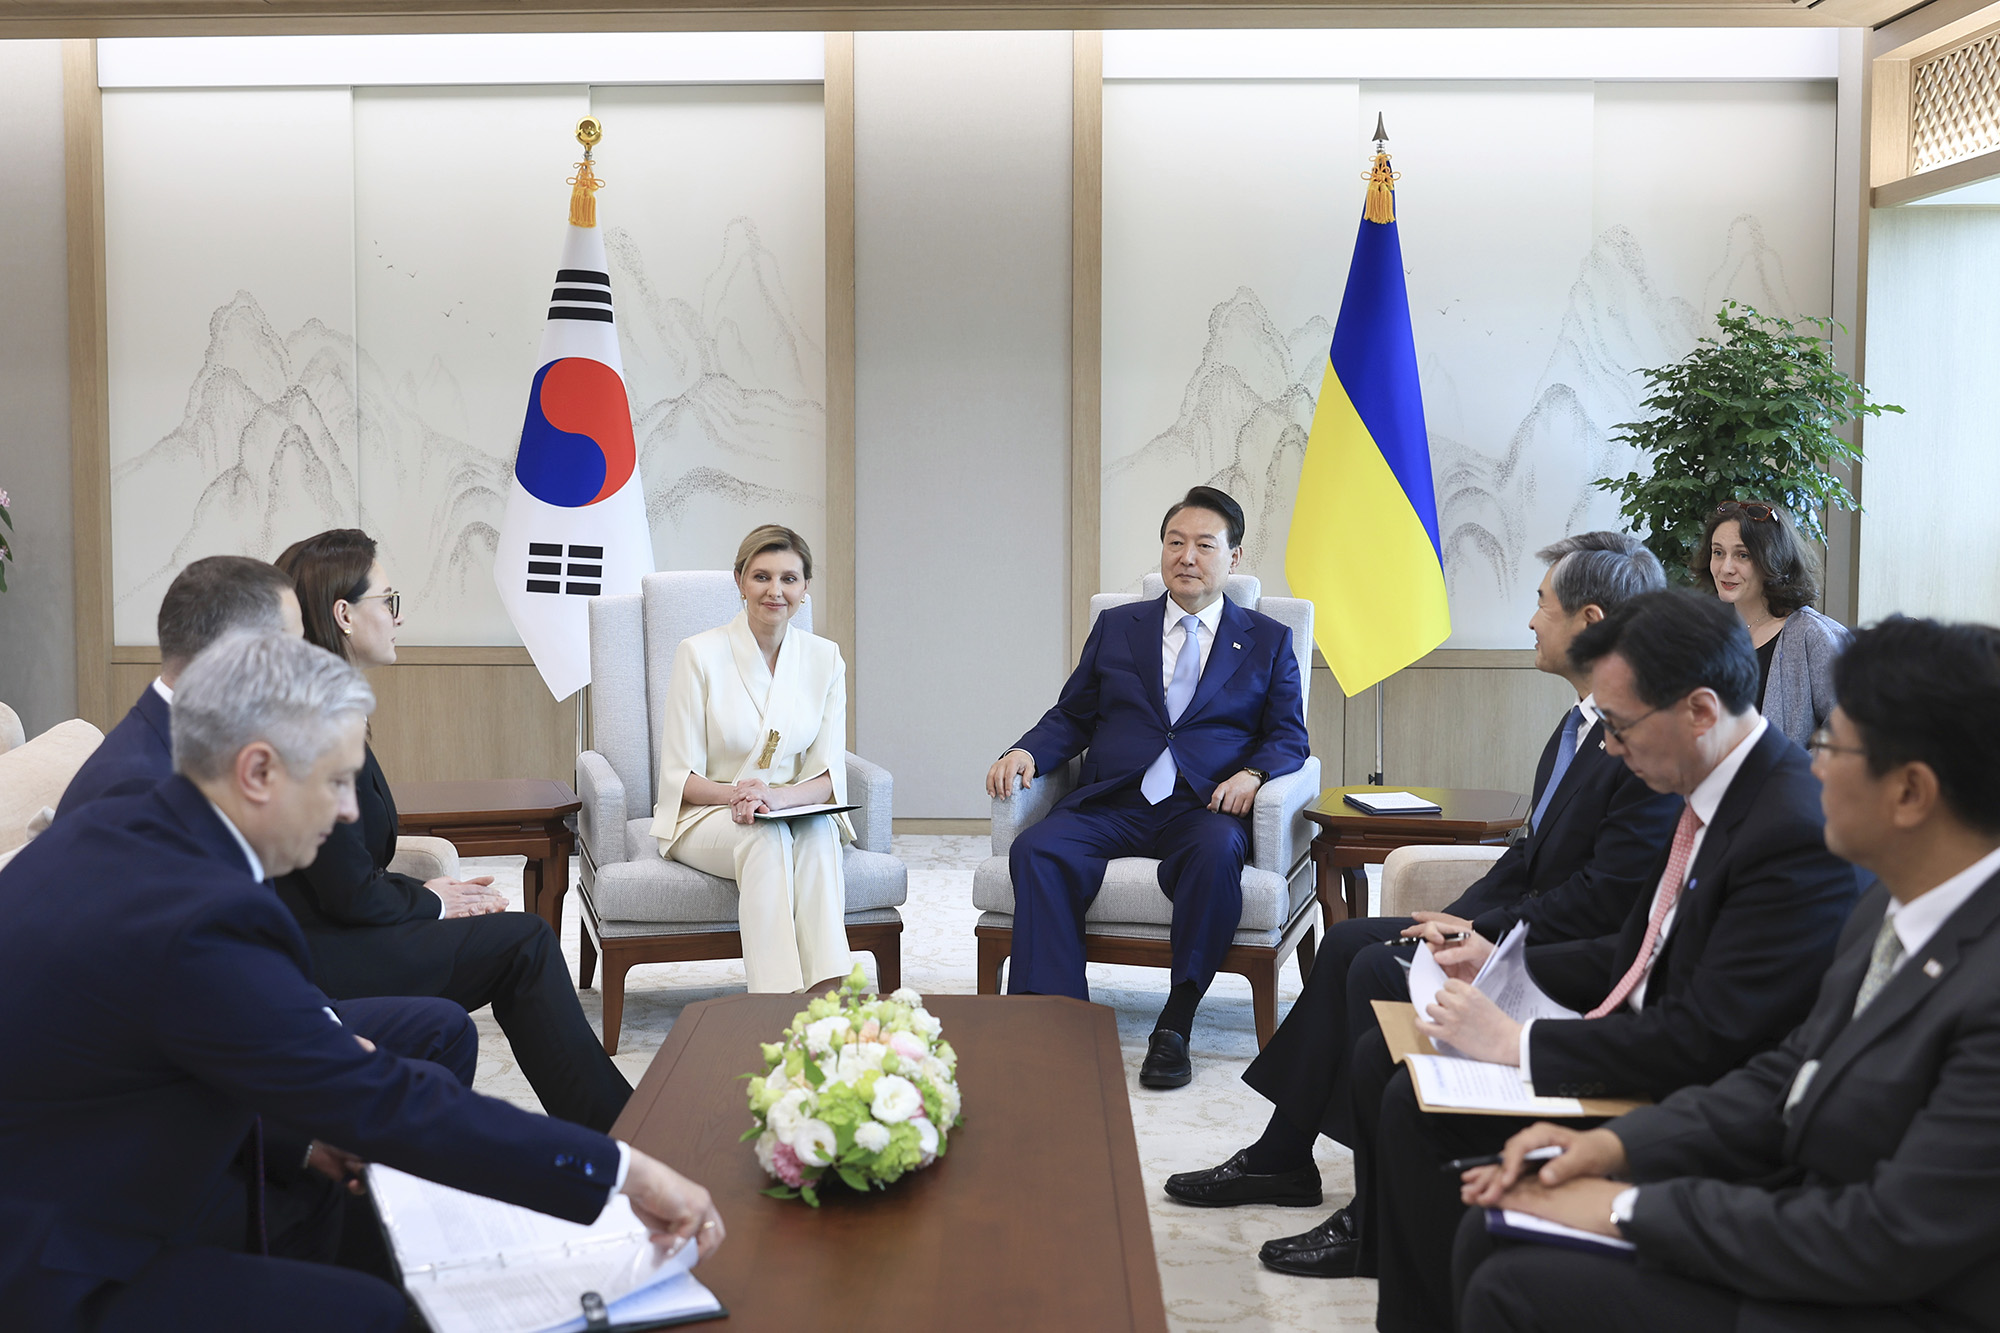 South Korean President Yoon Suk Yeol, center right, meets with Ukraine's first lady Olena Zelenska, center left, at the presidential office in Seoul, South Korea, on May 16.